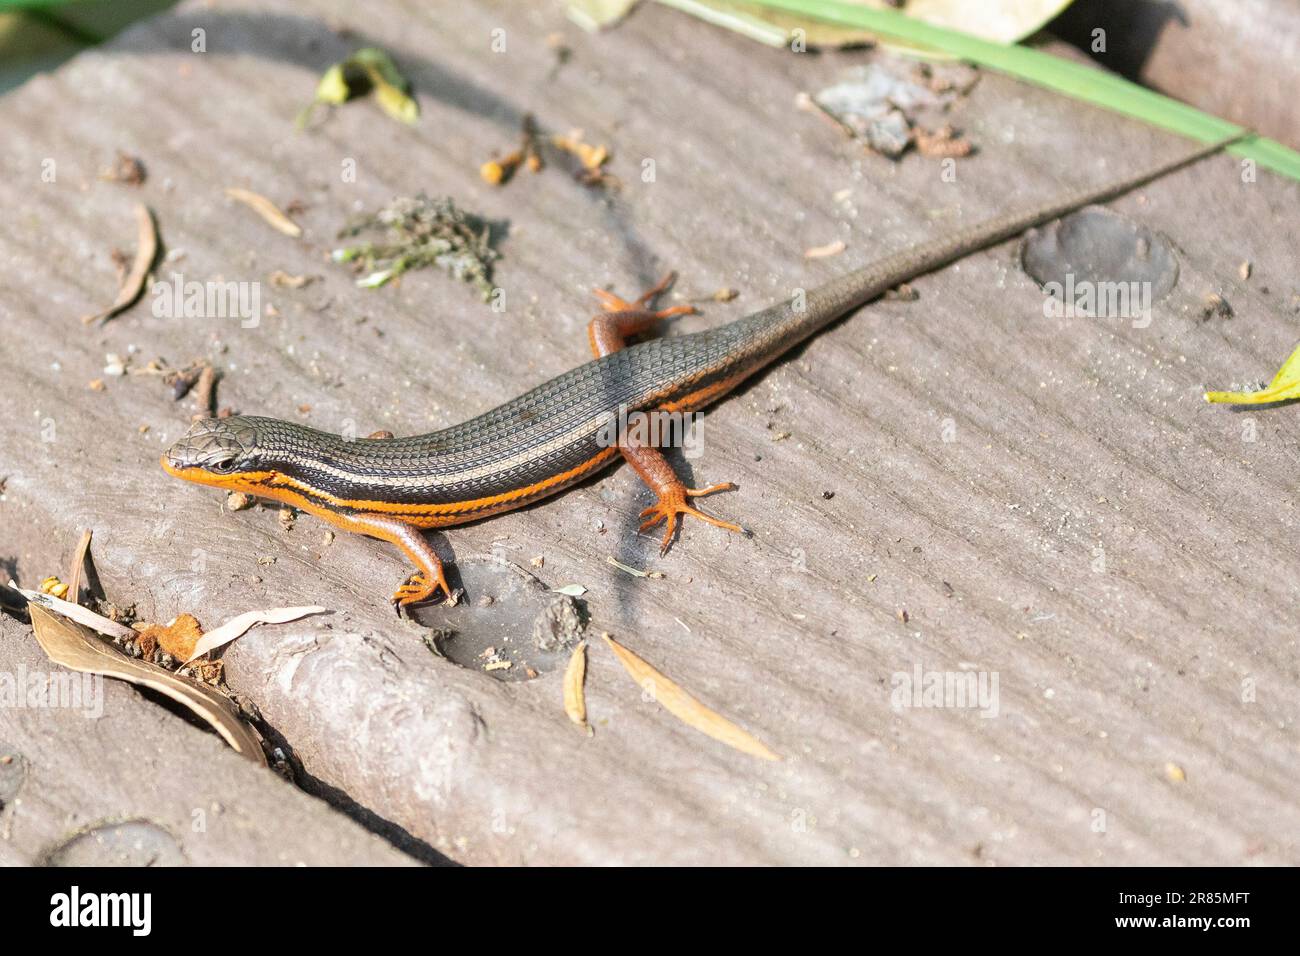 Red-sided Skink (Trachylepis homalocephala) breeding male Natures Valley, Western Cape, South Africa Stock Photo